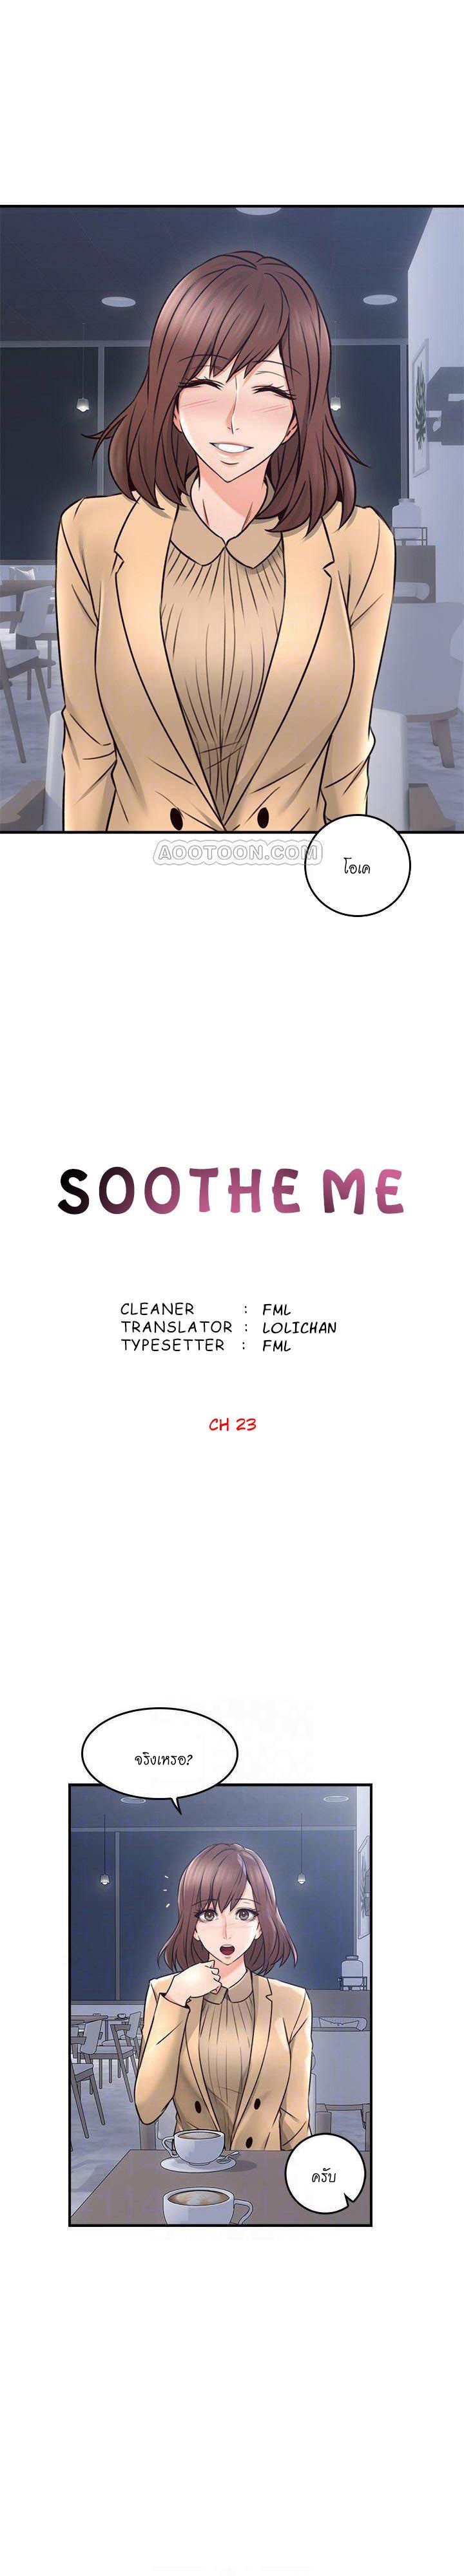 Soothe Me23 (3)